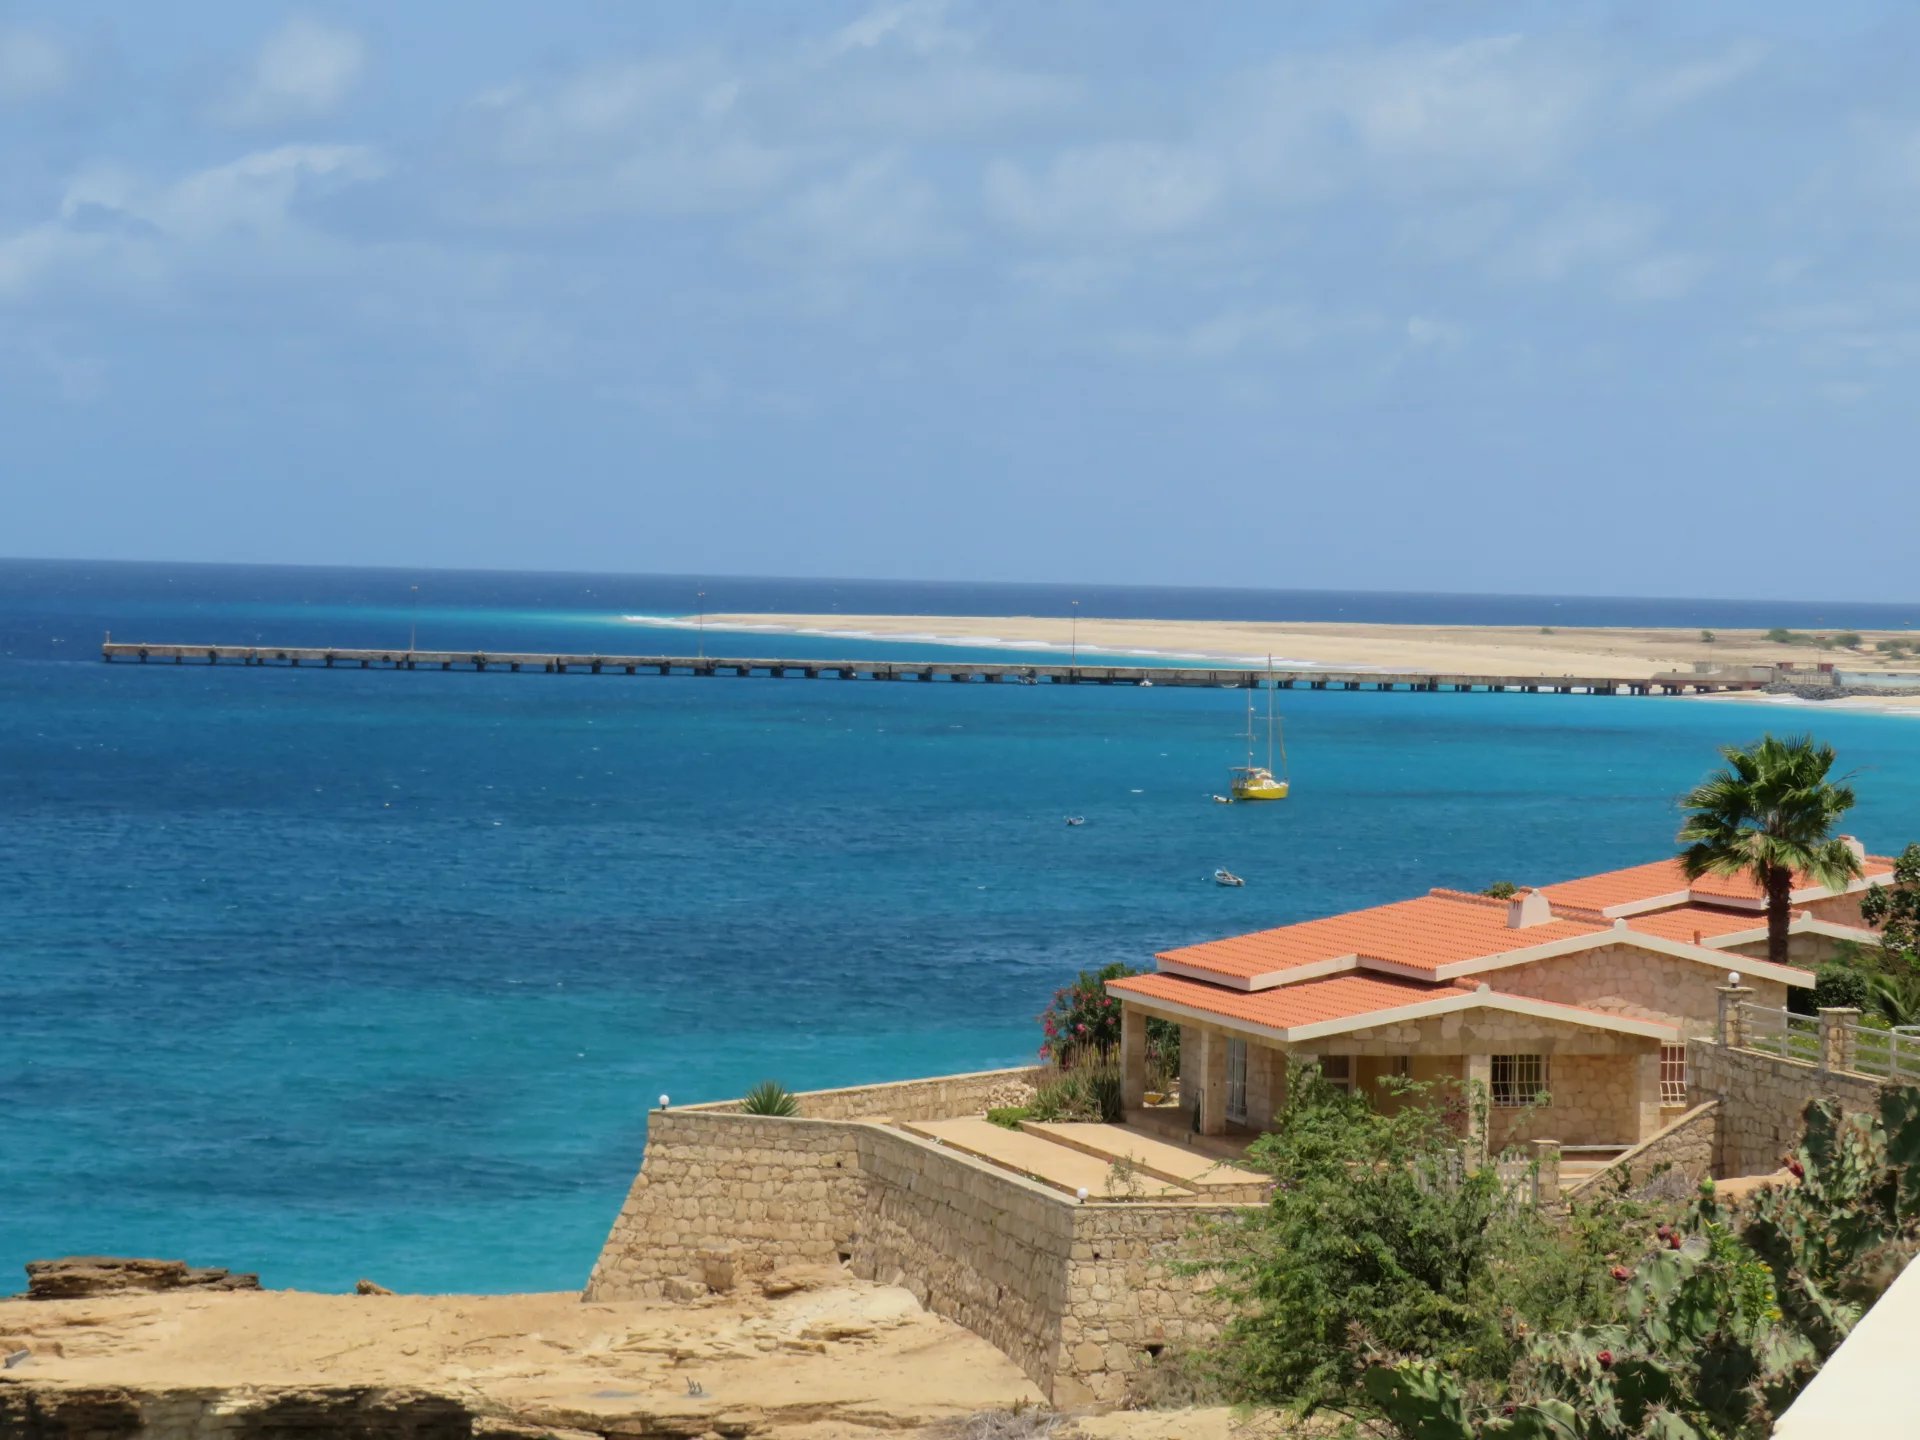 Sale Bed and breakfast - Maio - Cape Verde